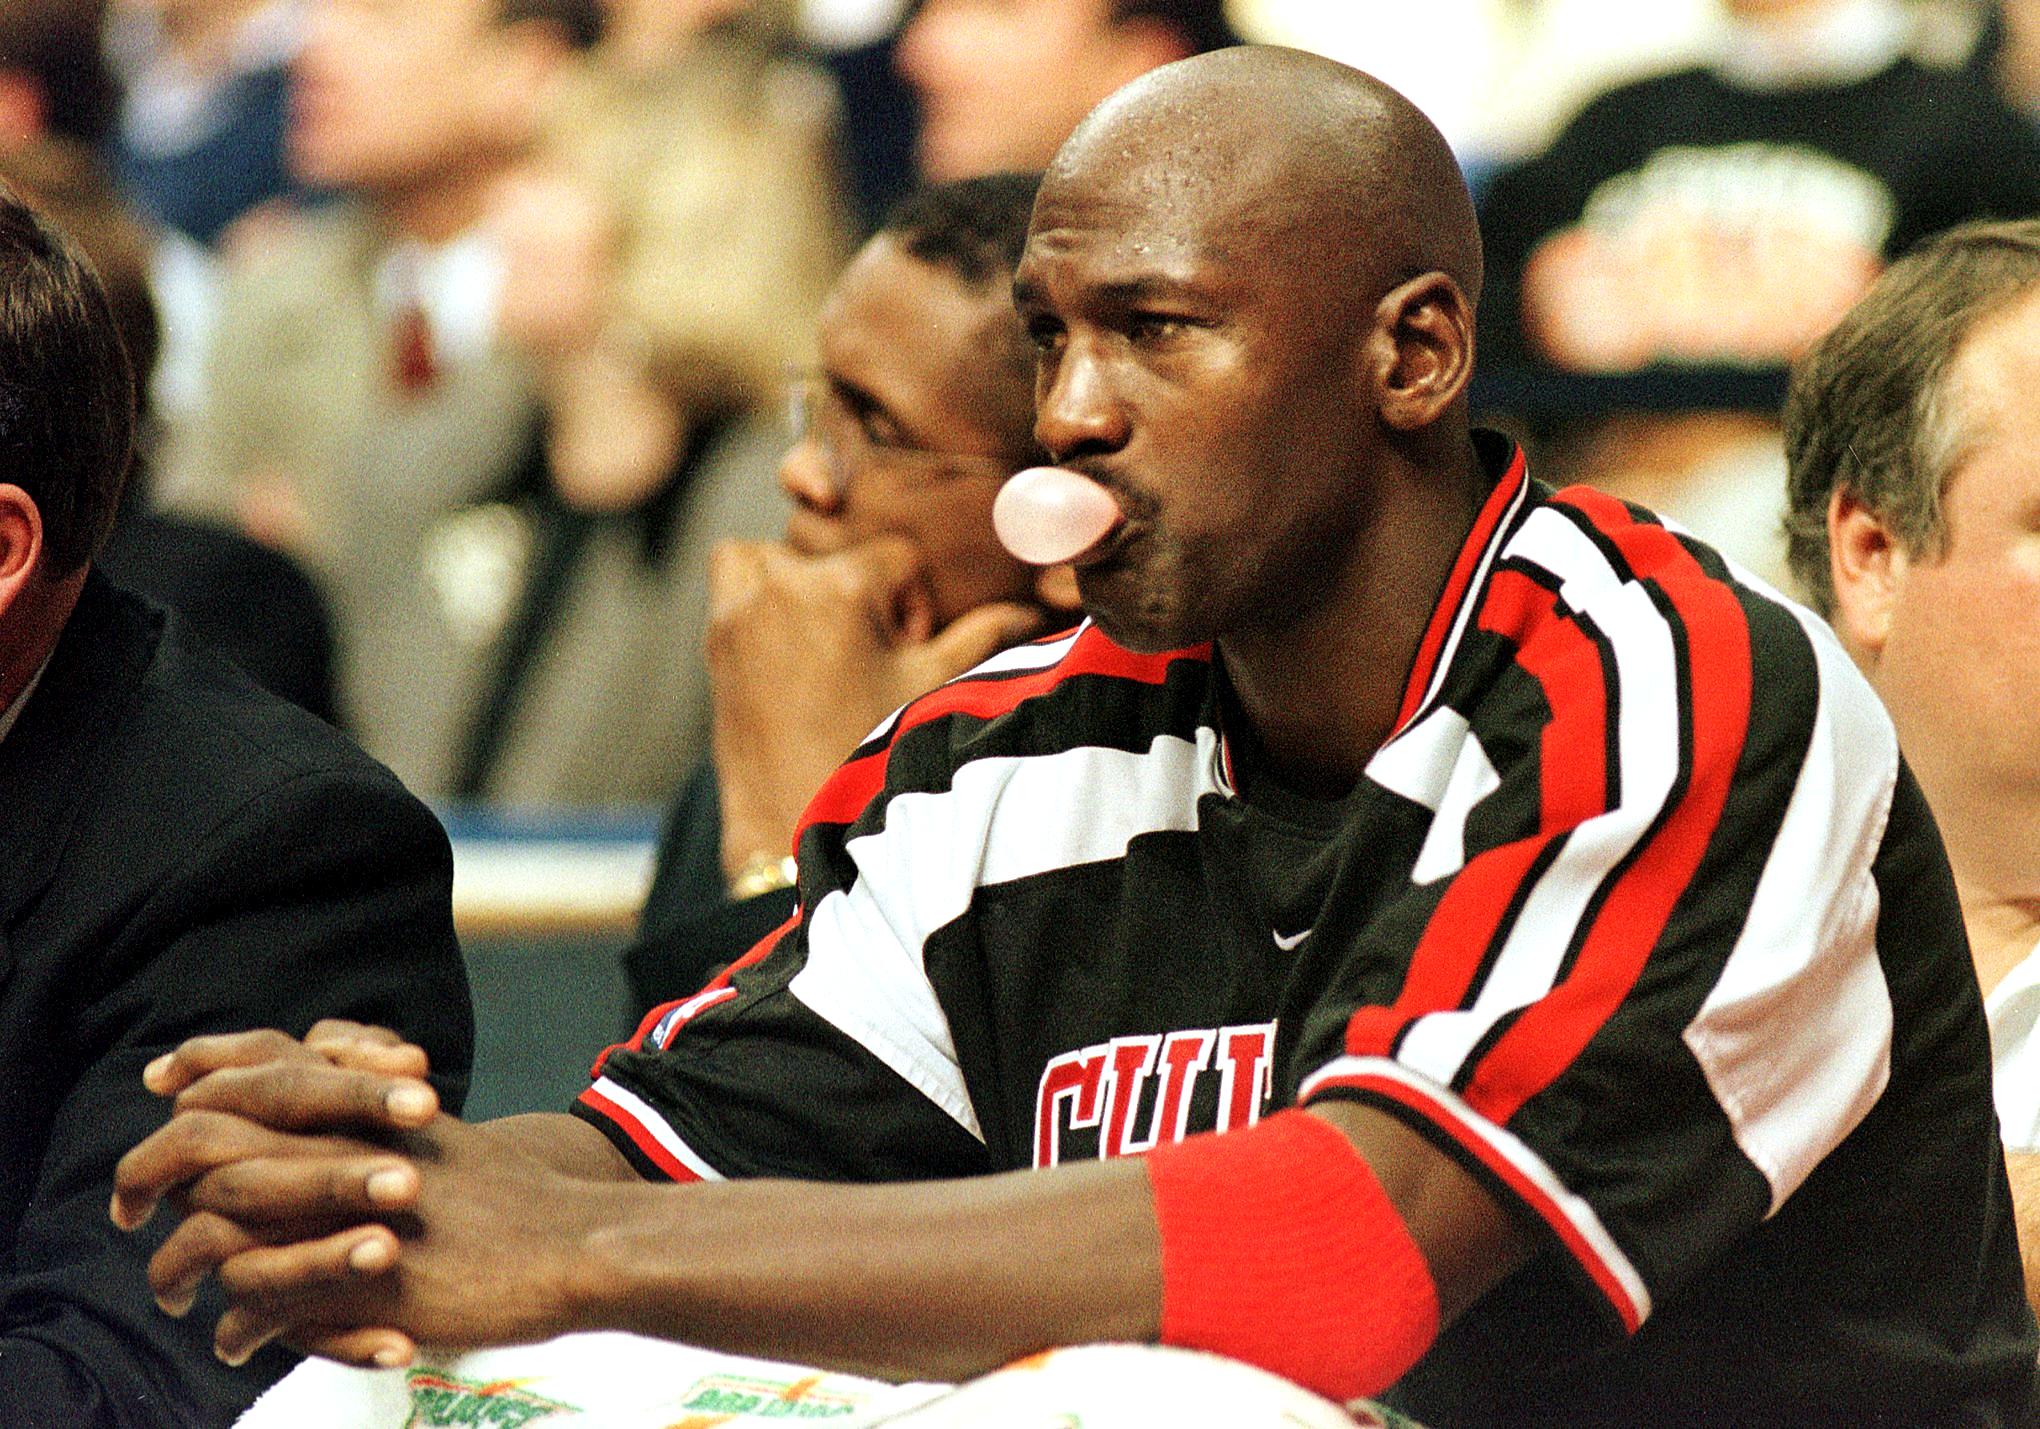 Bulls legend Michael Jordan sits on the bench during a gam against the Cleveland Cavaliers